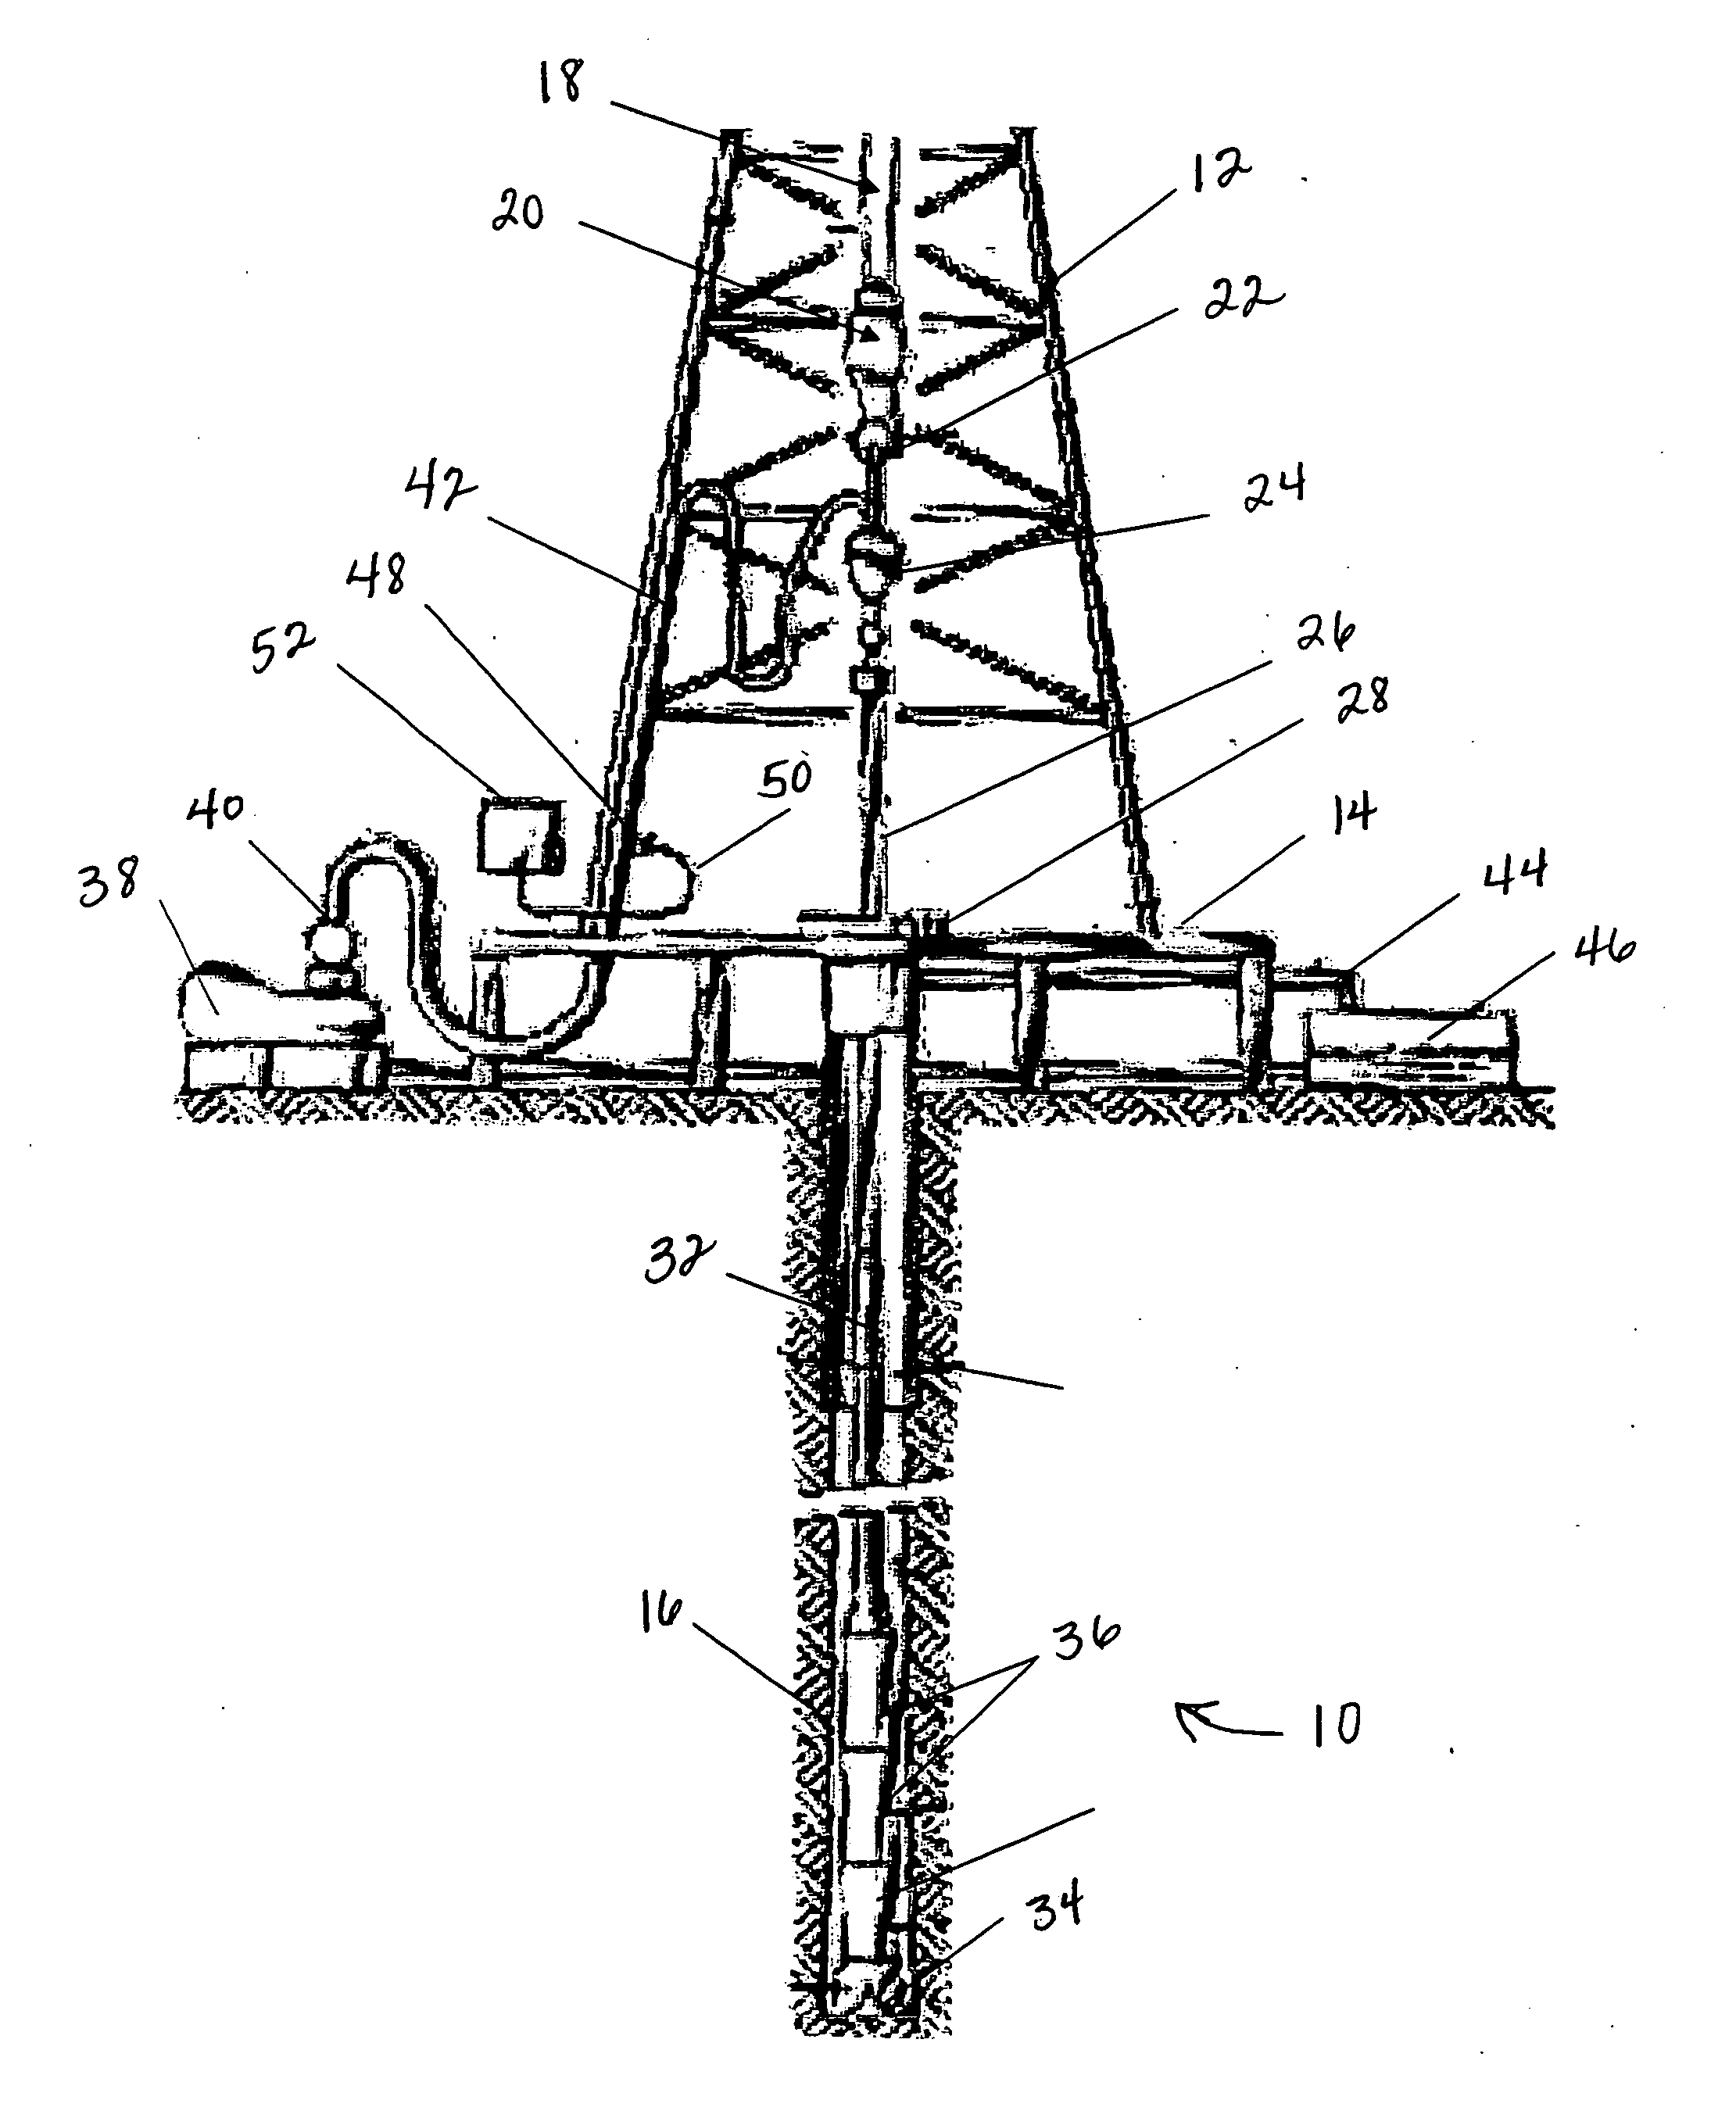 Measurement while drilling apparatus and method of using the same